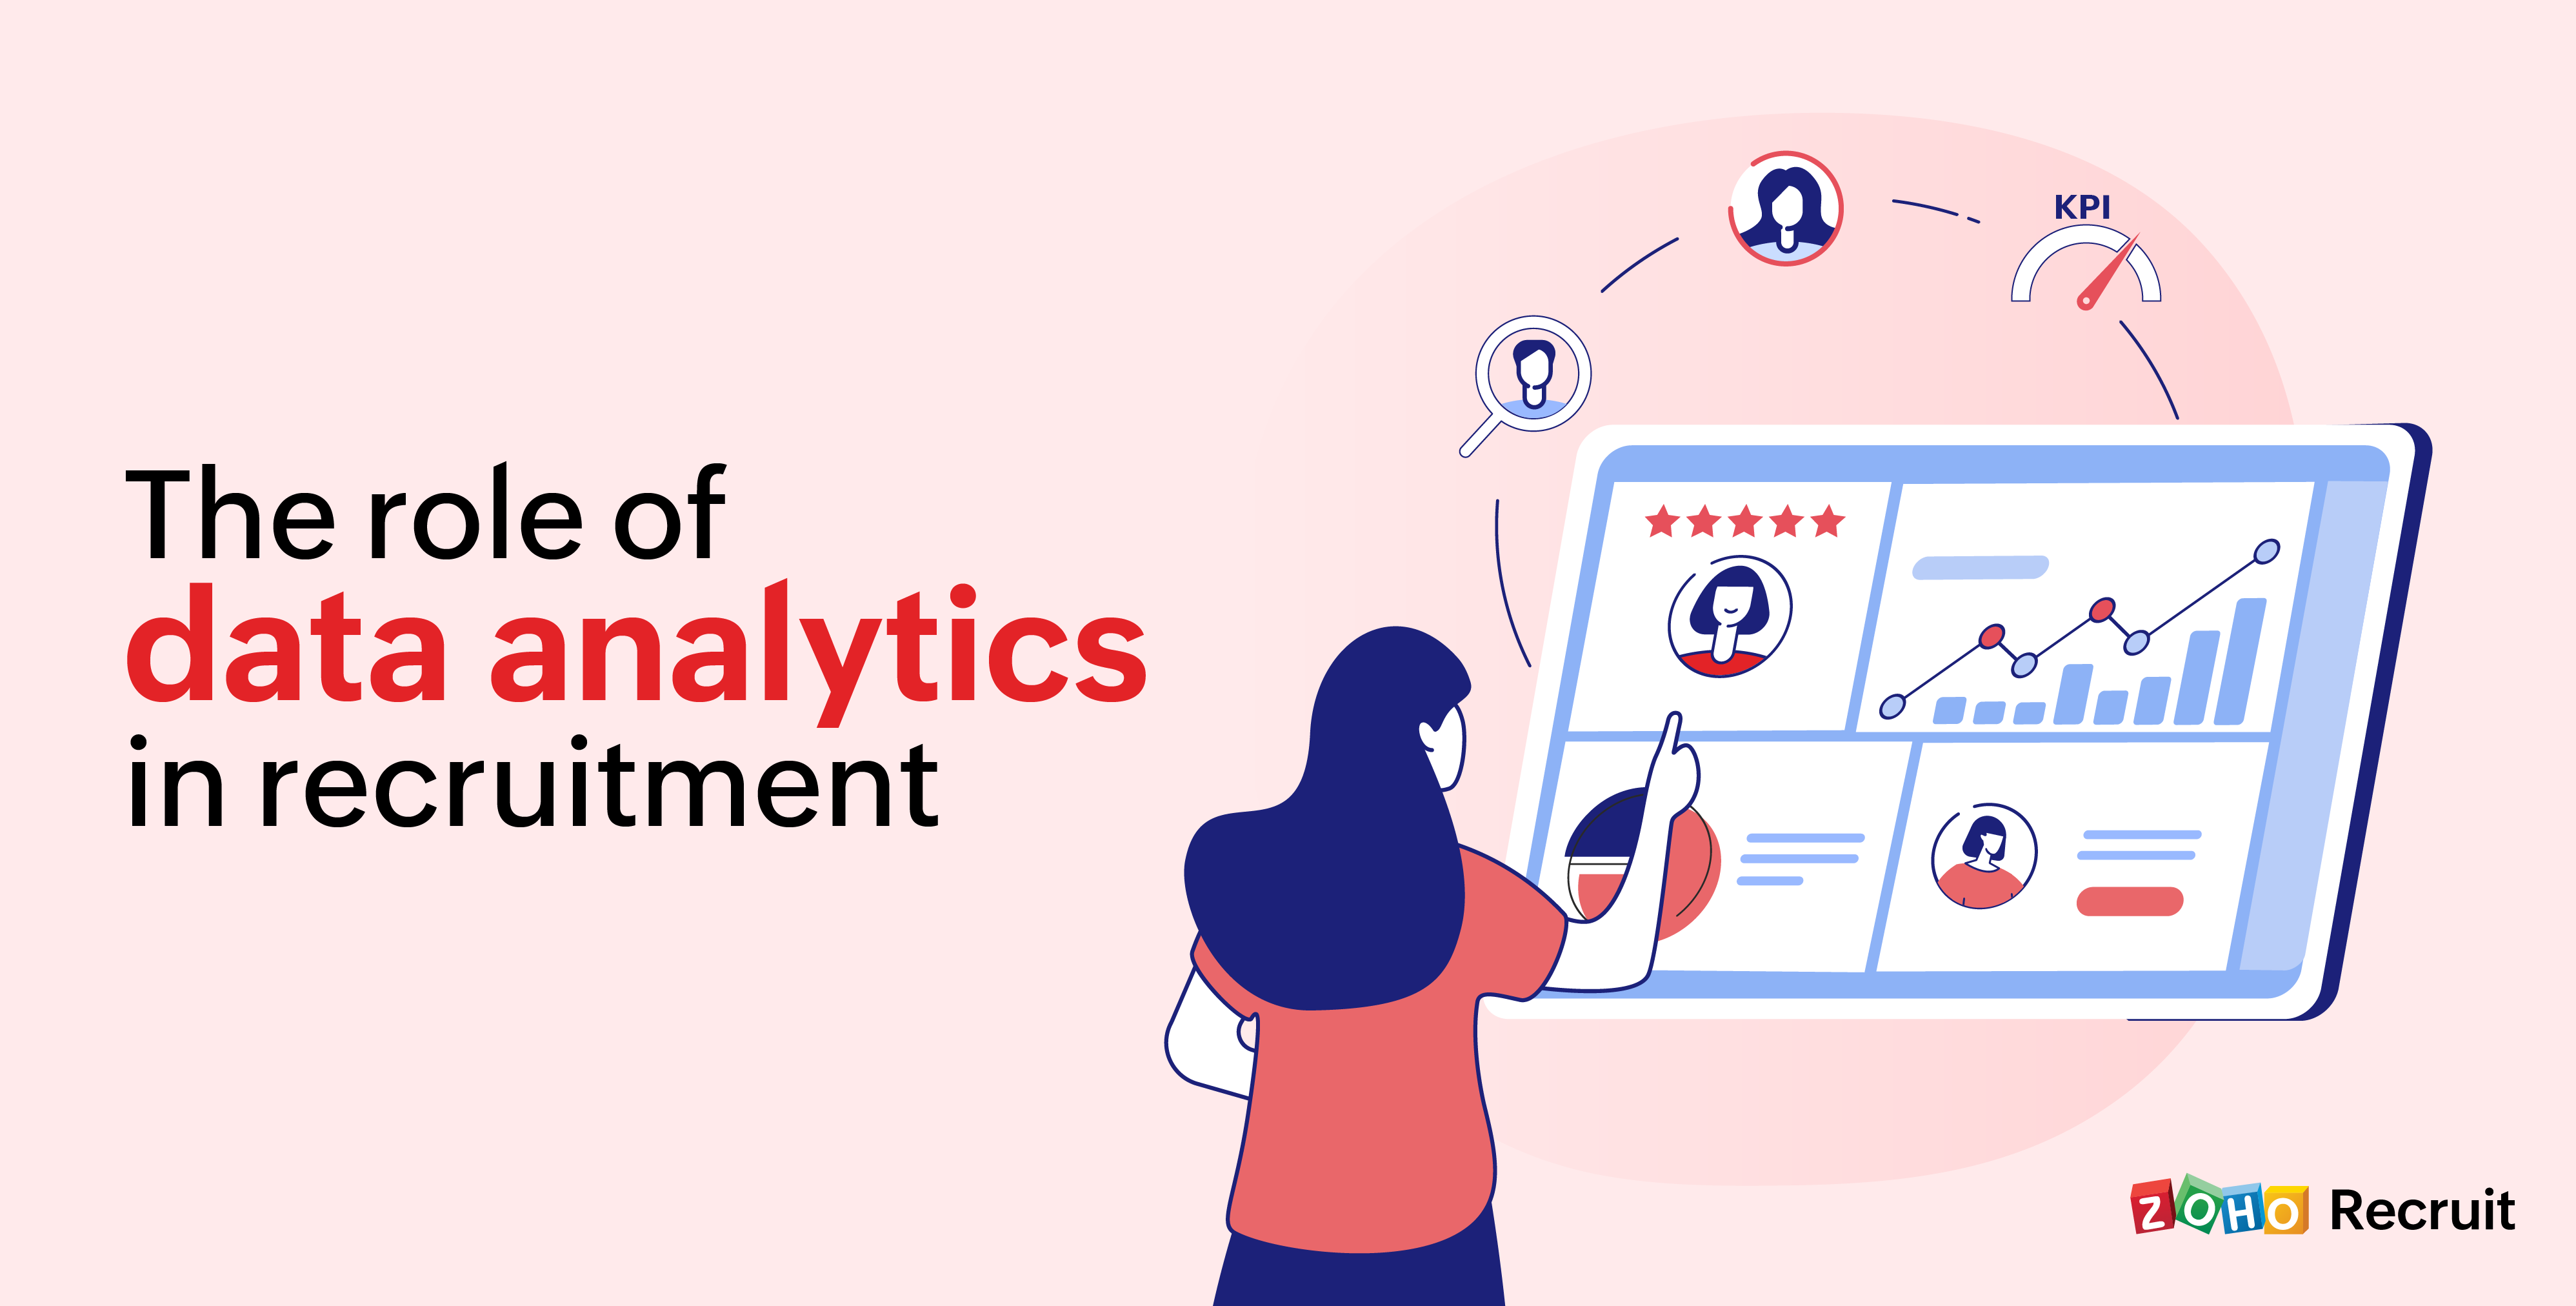 The role of data analytics in recruitment